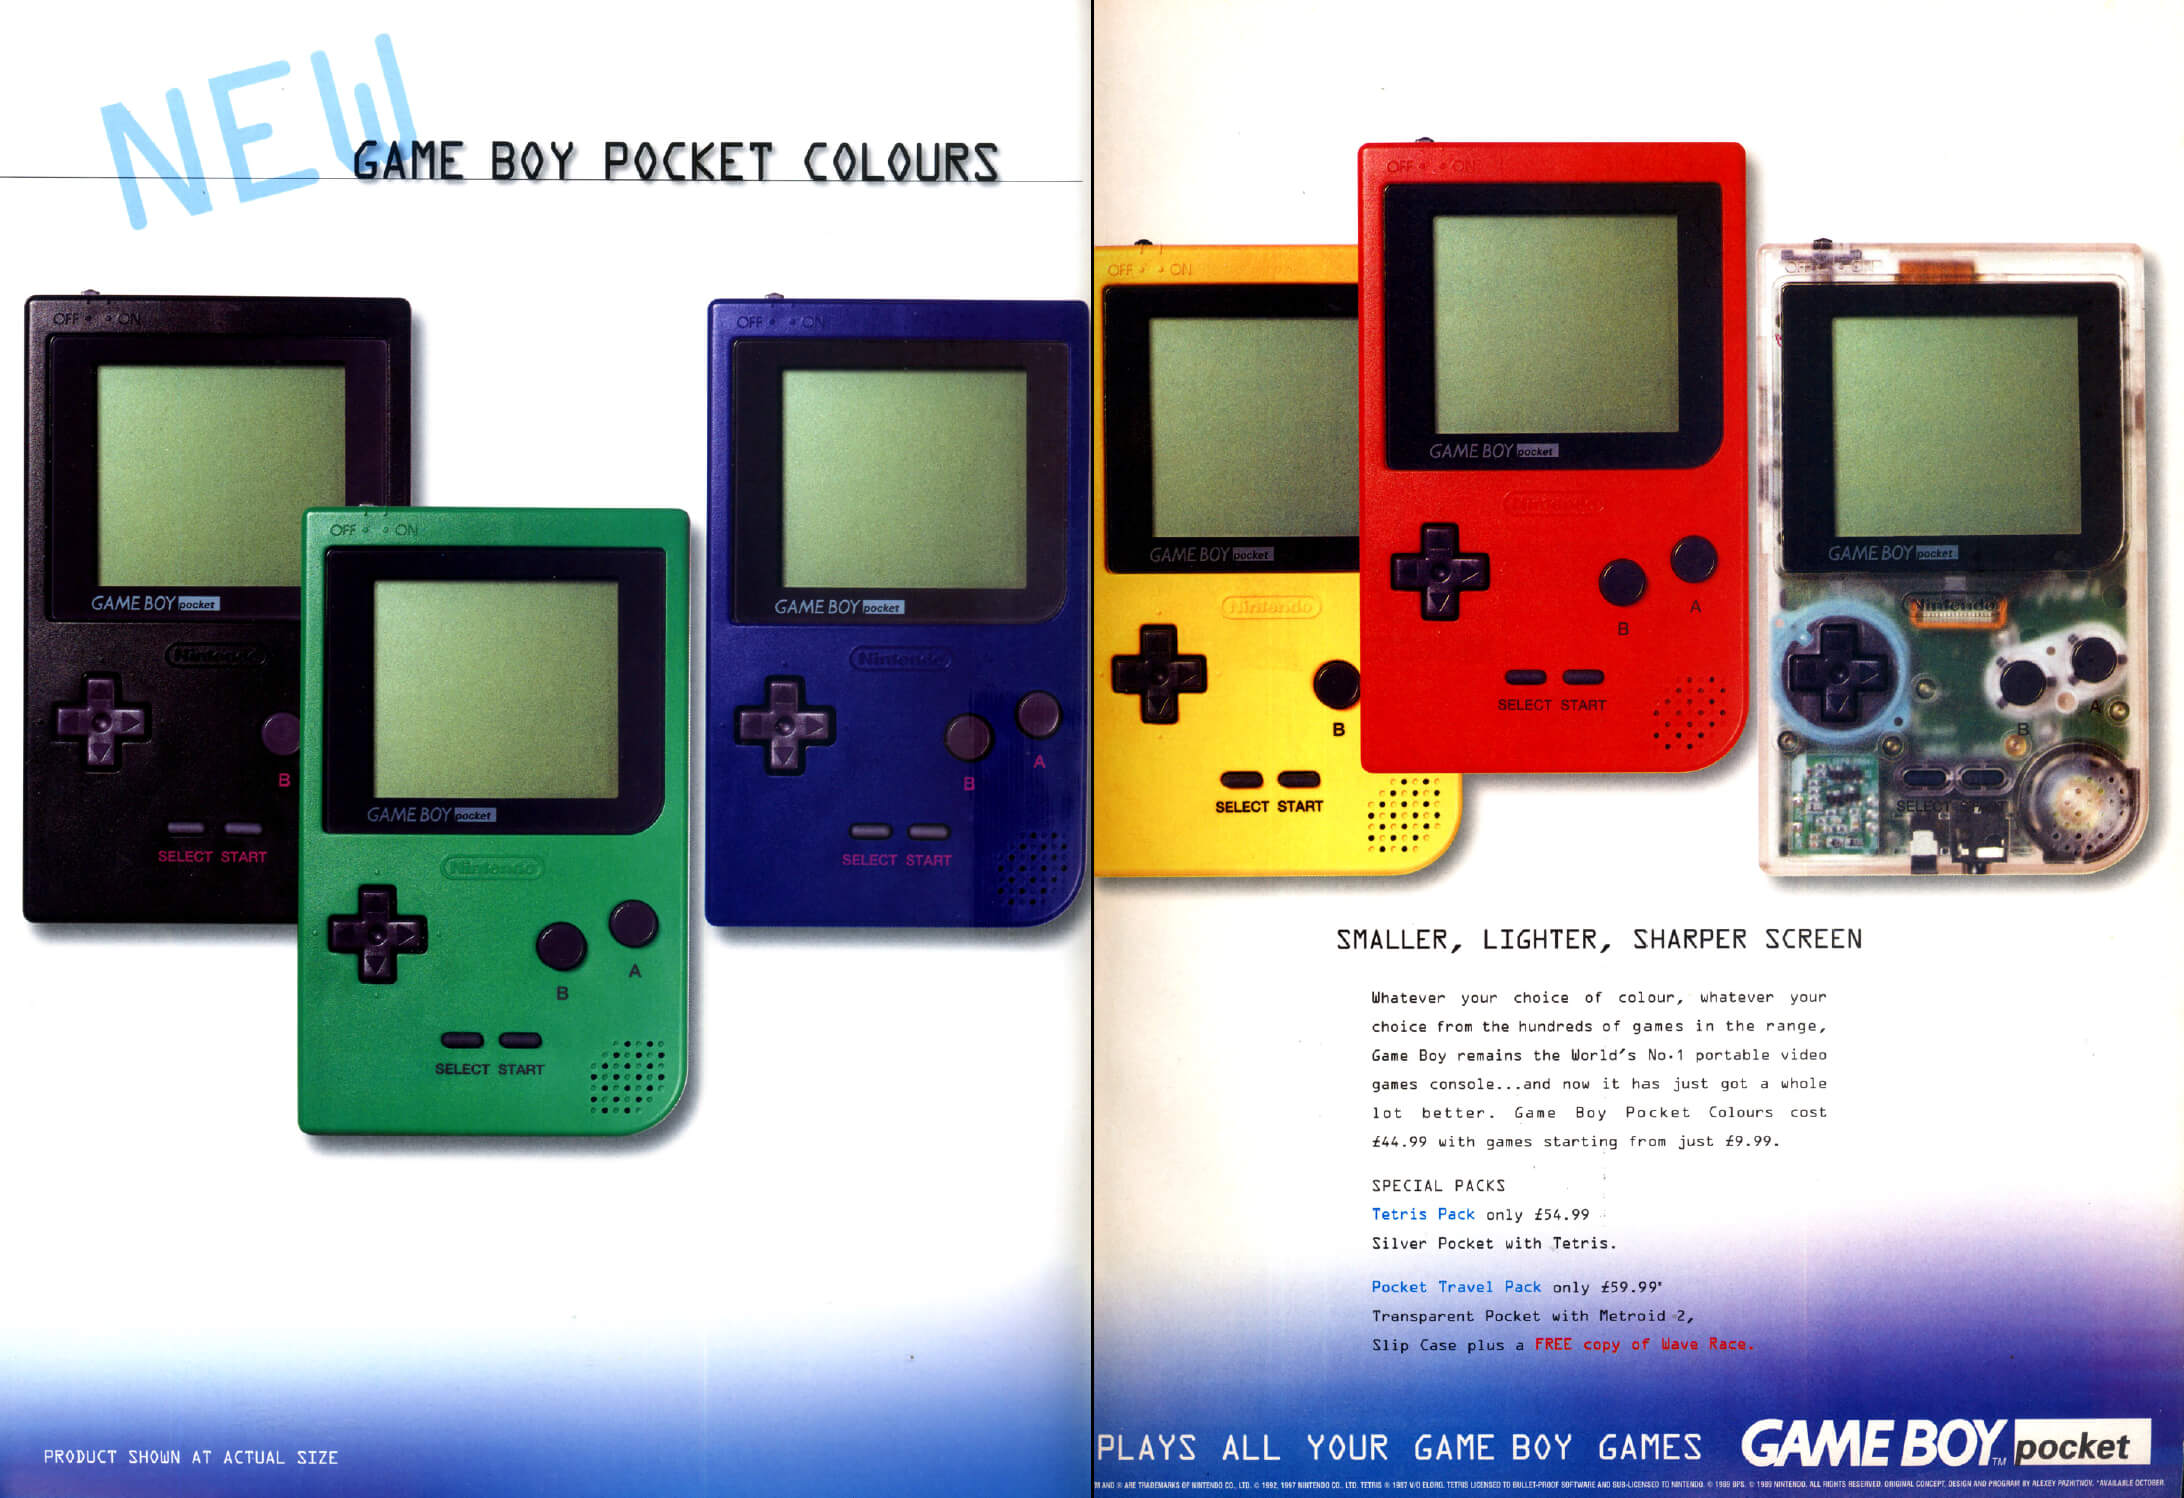 Image For Post | On July 21, 1996, Nintendo released the Game Boy Pocket for US$69.99: a smaller, lighter unit that required fewer batteries. It has space for two AAA batteries, which provide approximately 10 hours of gameplay. The unit is also fitted with a 3 volt, 2.35 mm x 0.75 mm DC jack which can be used to power the system. 

The Pocket has a smaller link port, which requires an adapter to link with the older Game Boy. The port design is used on all subsequent Game Boy models, excluding the Game Boy Micro. The screen was changed to a true black-and-white display, rather than the "pea soup" monochromatic display of the original Game Boy. Also, the Game Boy Pocket (GBP) has a larger screen than the Game Boy Color (GBC) that later superseded it.